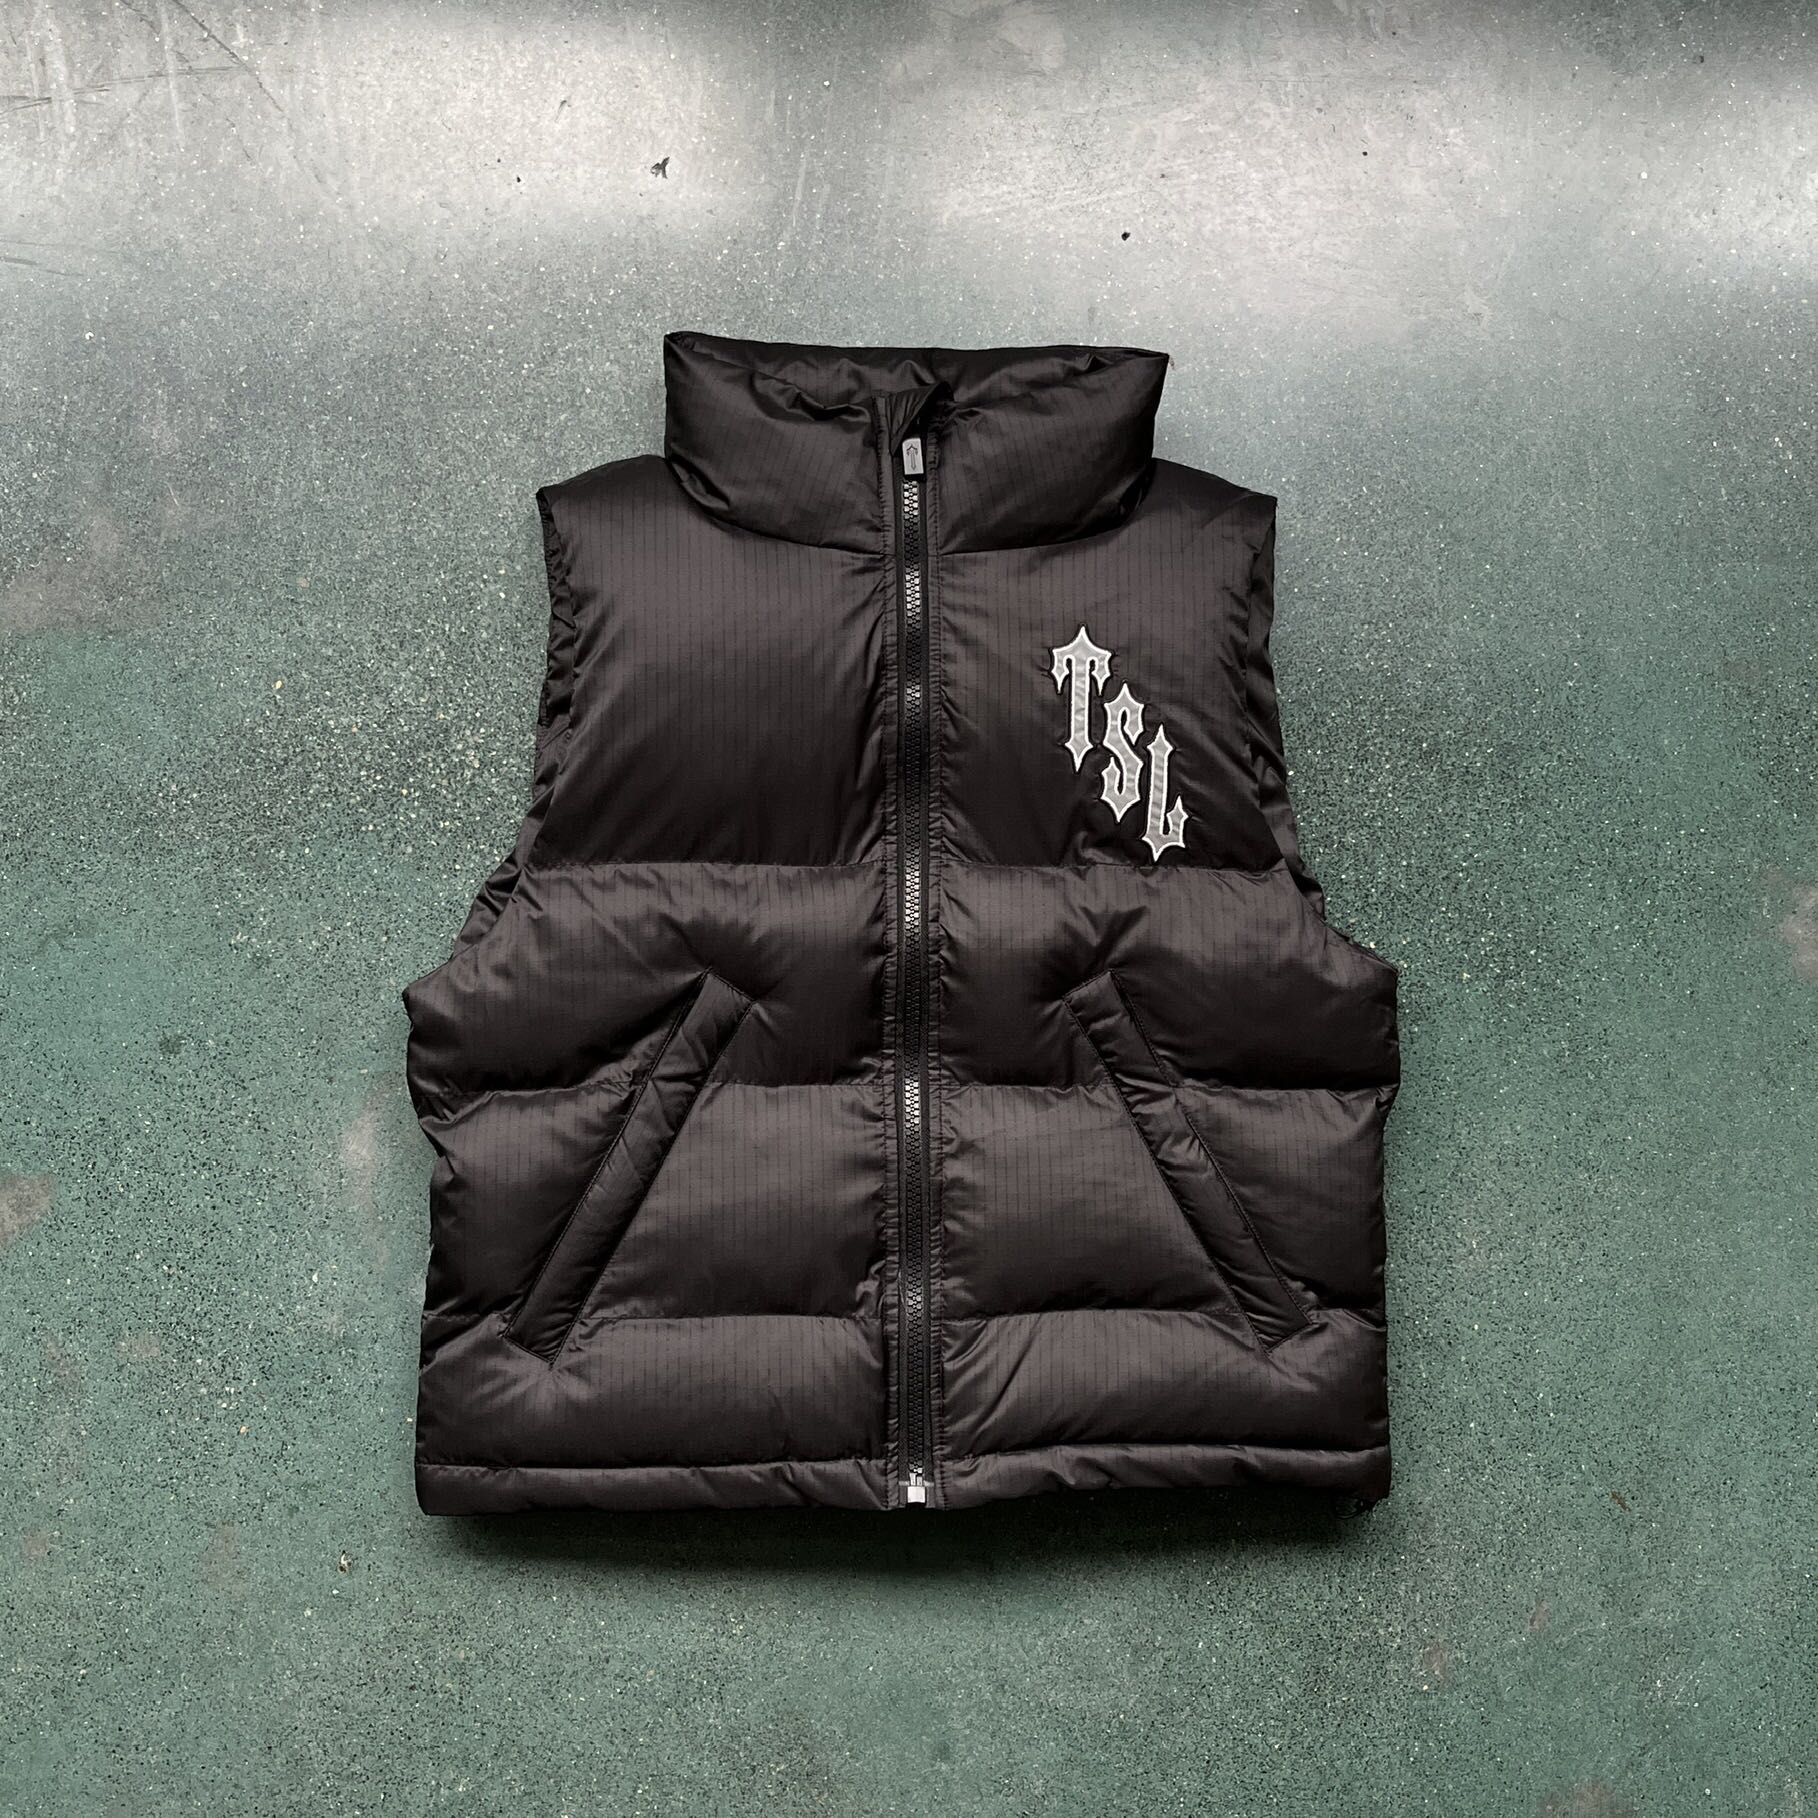 Trapstar Shooters Gilet - 4